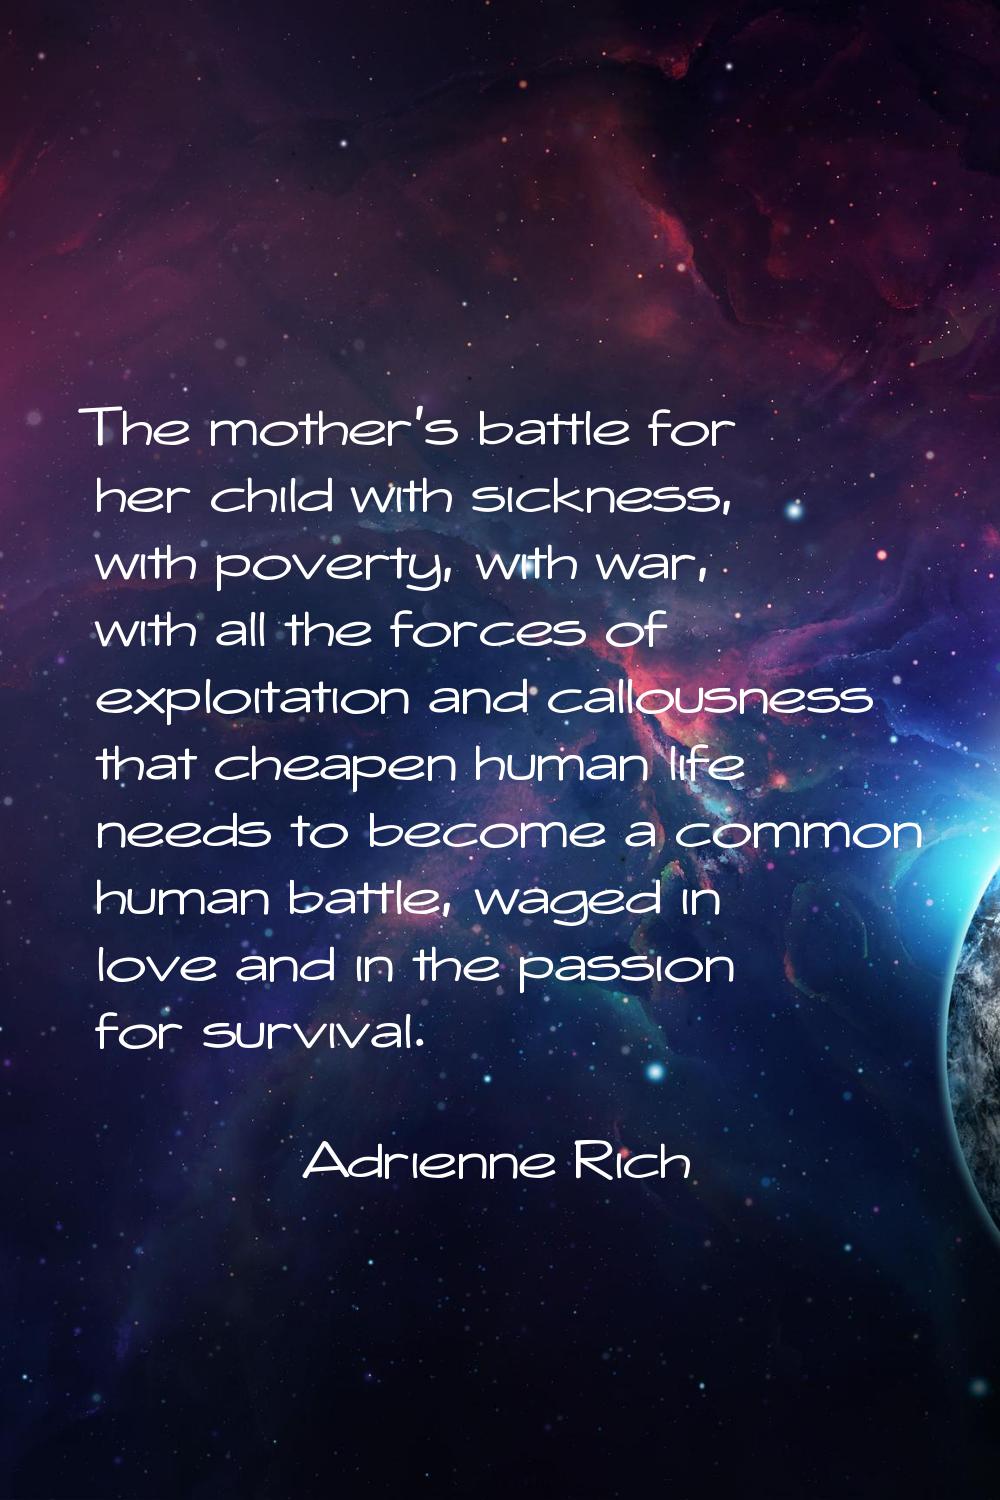 The mother's battle for her child with sickness, with poverty, with war, with all the forces of exp